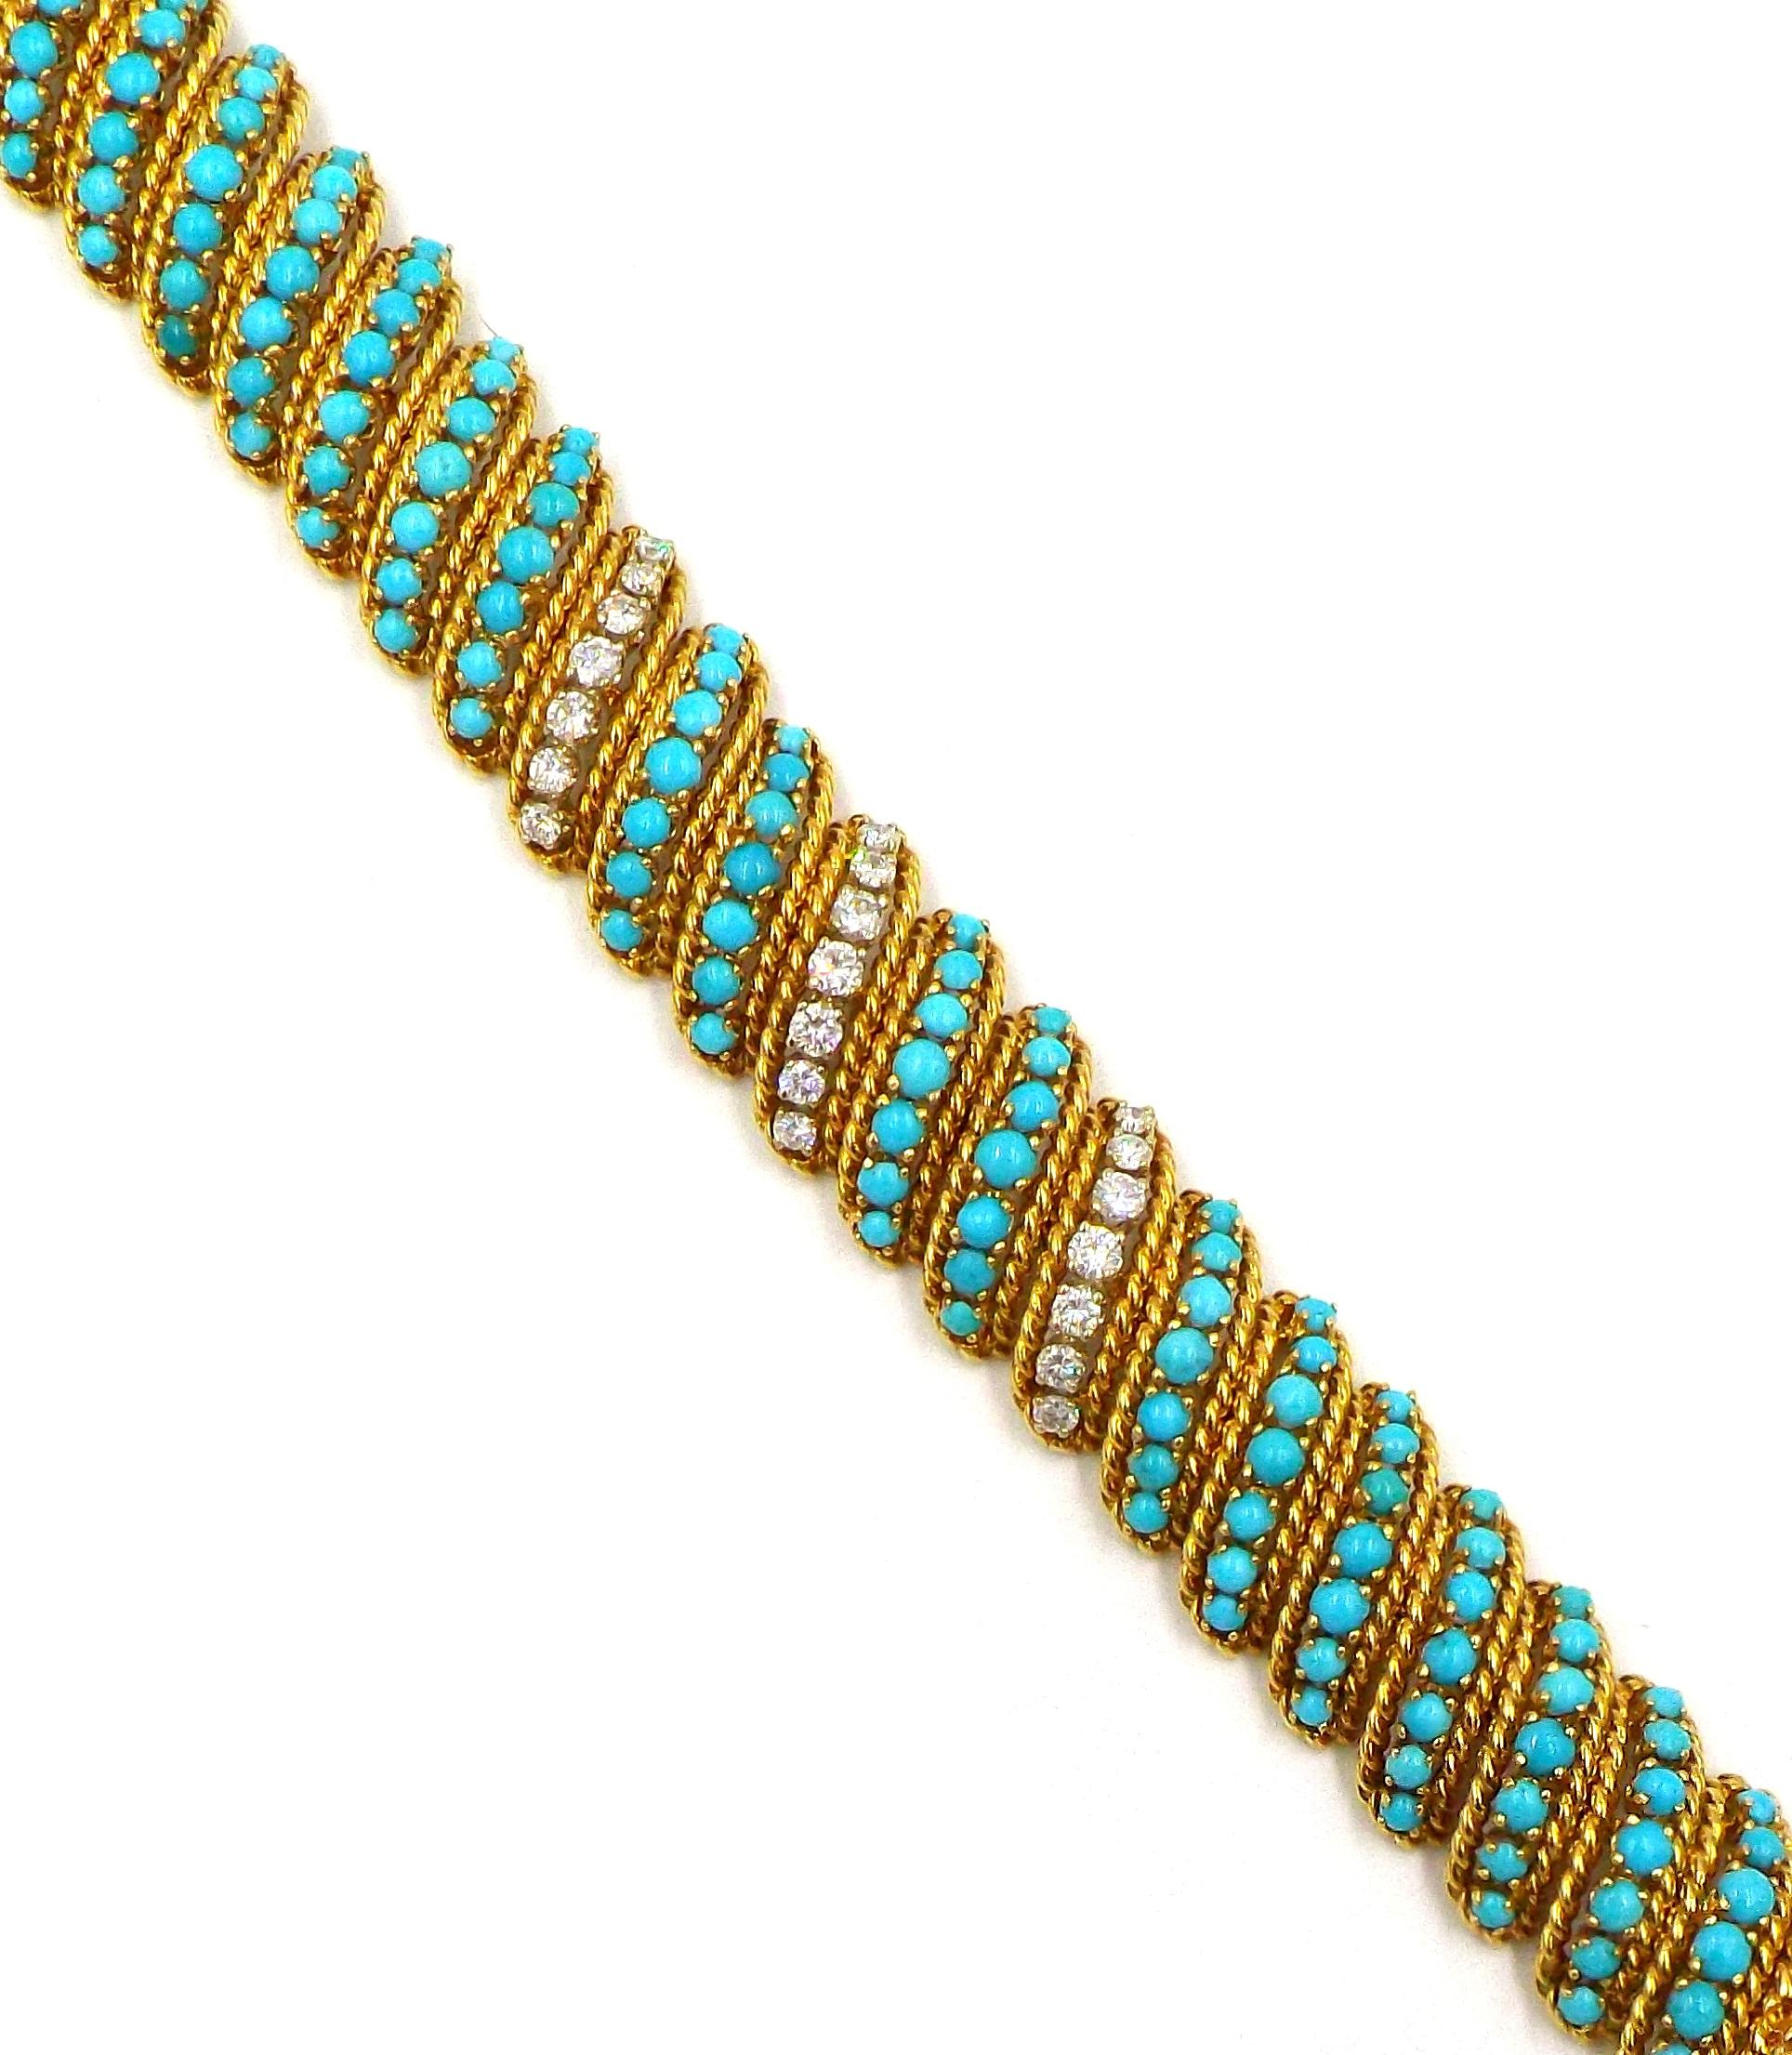 Composed of a series of scrolled turquoise cabochon links, with three rows set with round brilliant-cut diamonds, each within a twisted gold frame; mounted in 18k gold; estimated total diamond weight: 1.75 carats; length 6 3/4 in.